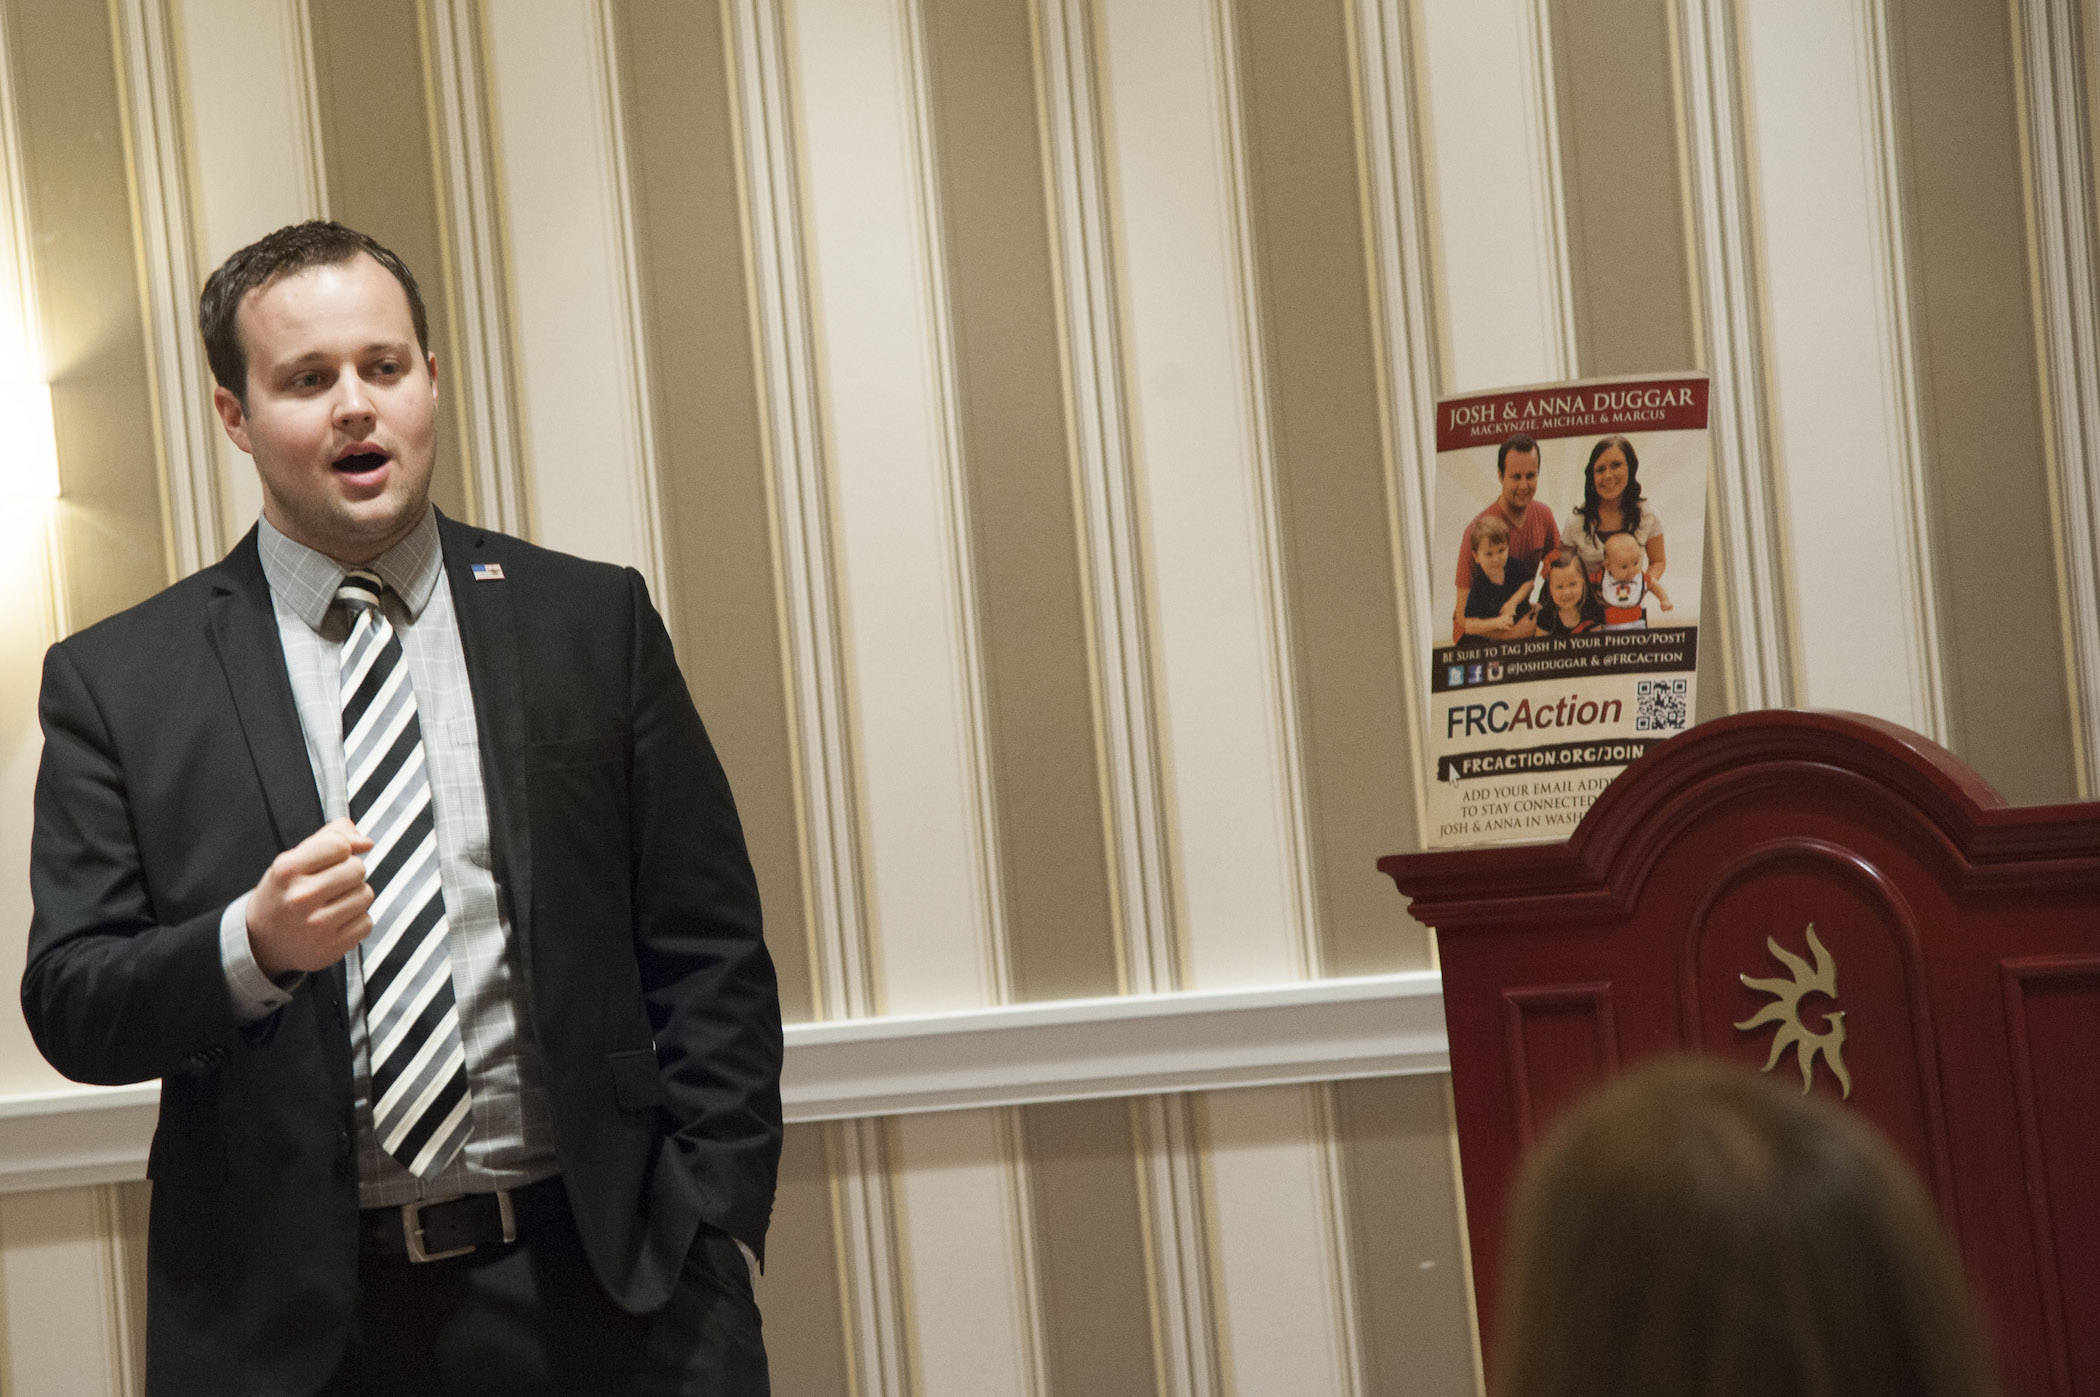 Josh Duggar of the Duggar family speaking at a conference in a suit